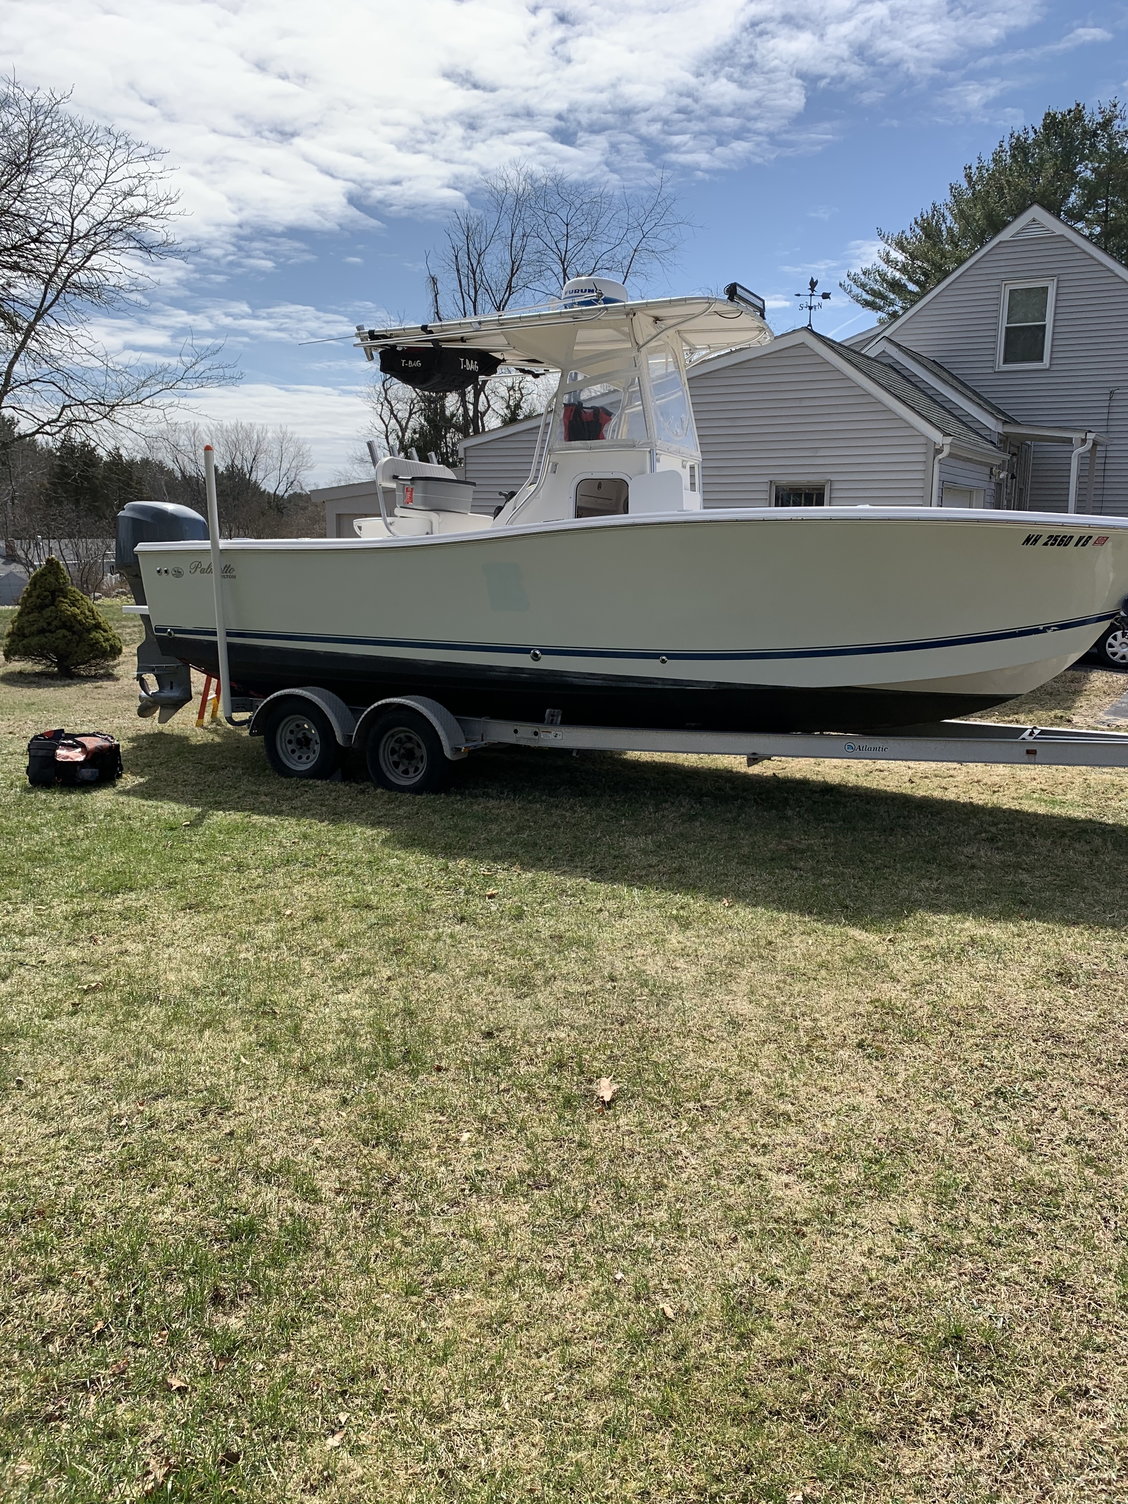 Raising Bow on Trailer? - The Hull Truth - Boating and Fishing Forum